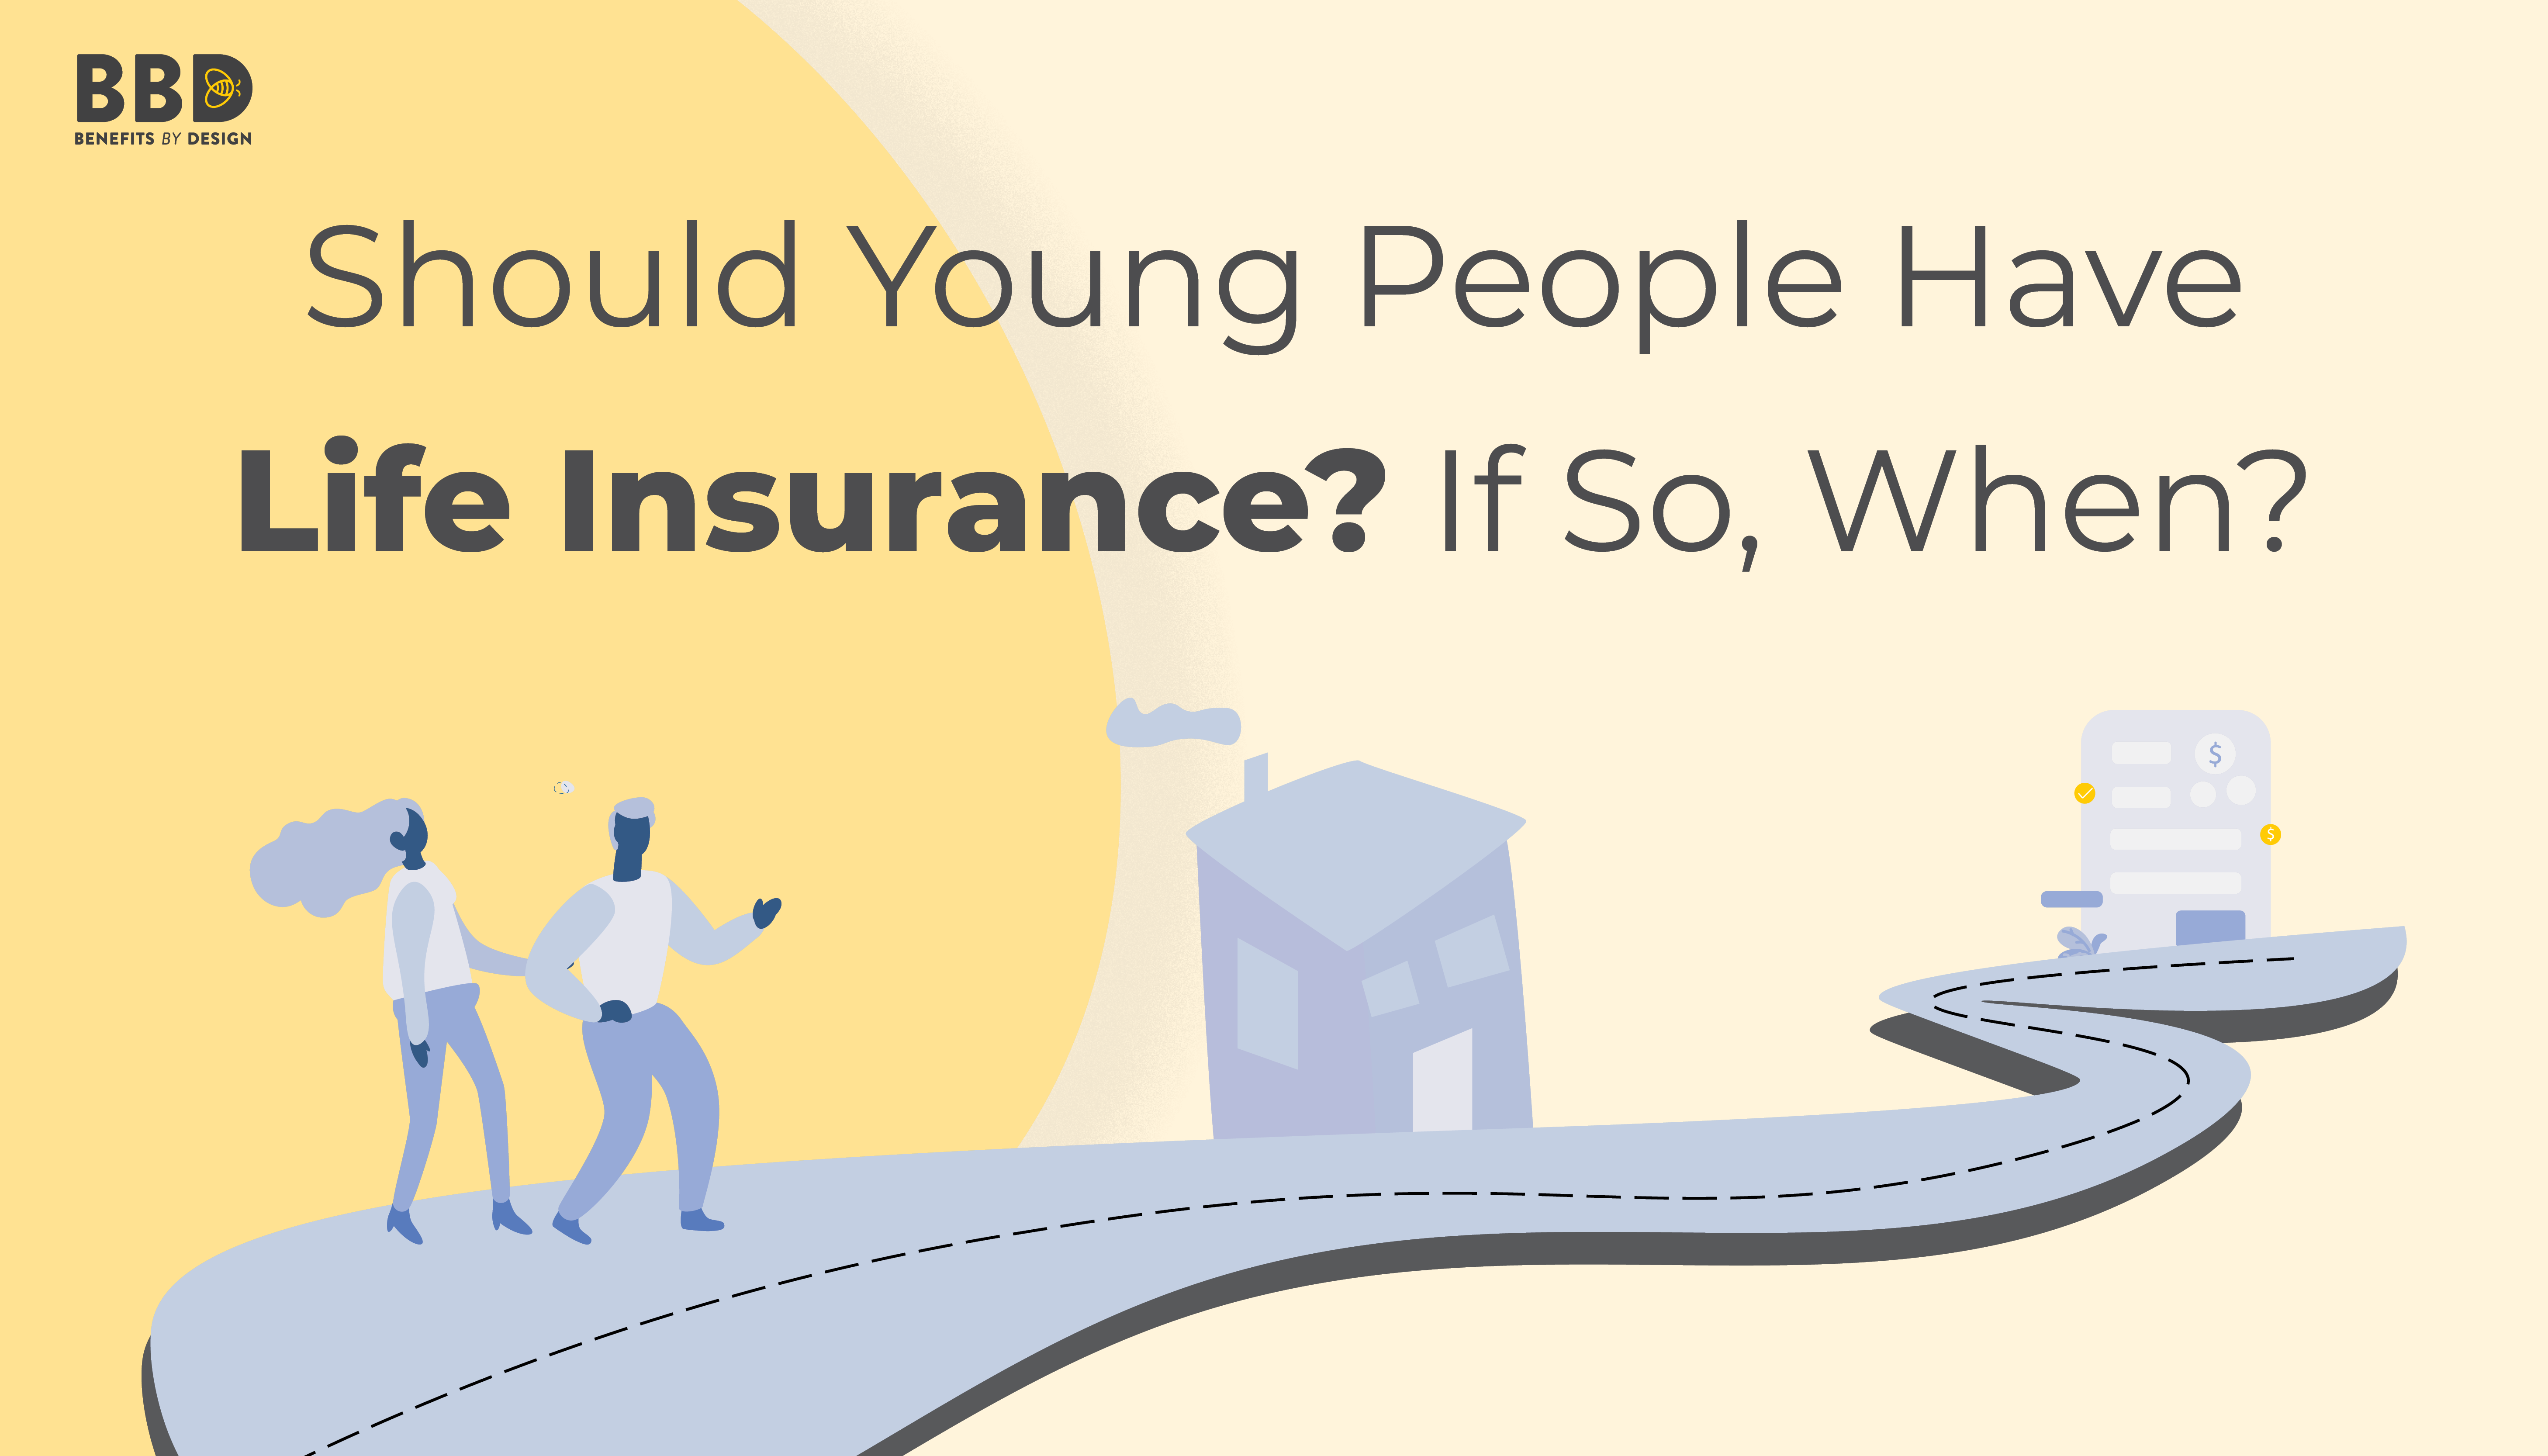 Should Young People Have Life Insurance? If So, When? | Benefits by Design